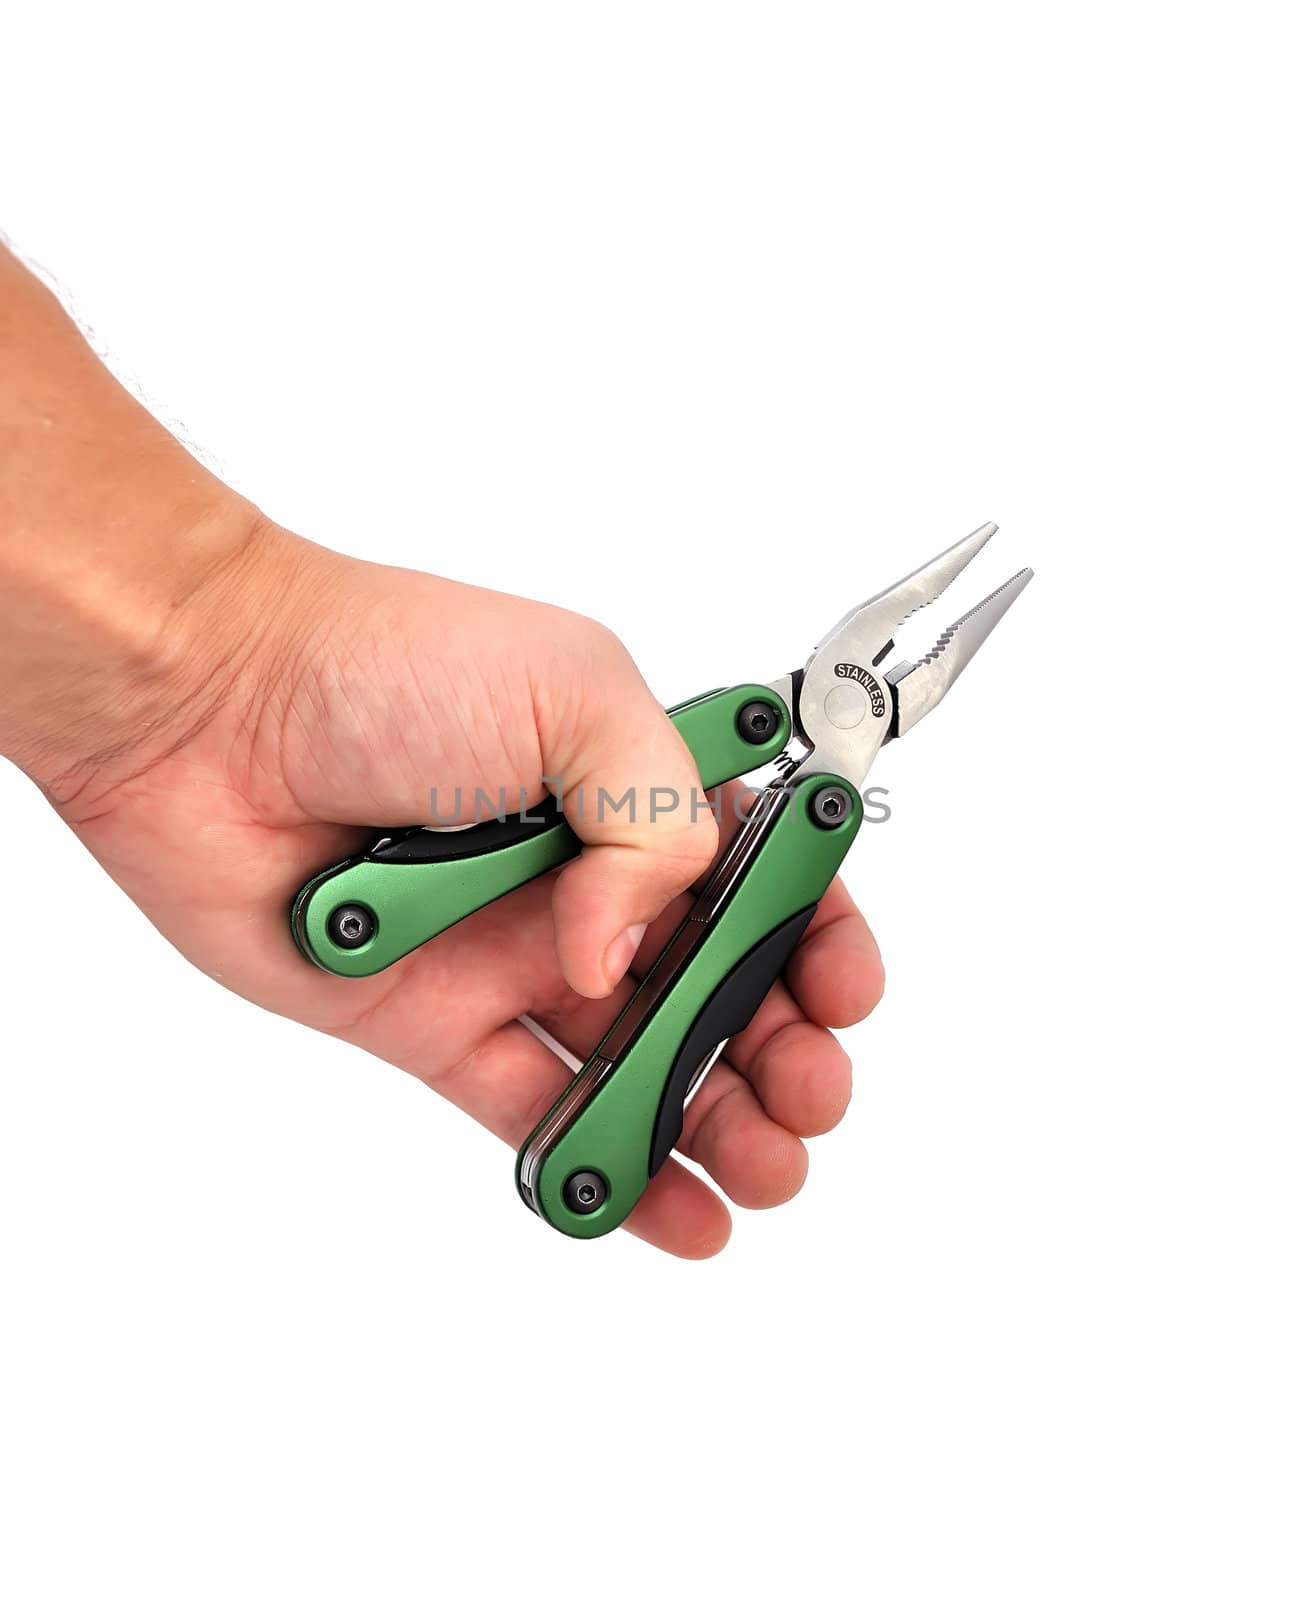 pocket tool on a white background